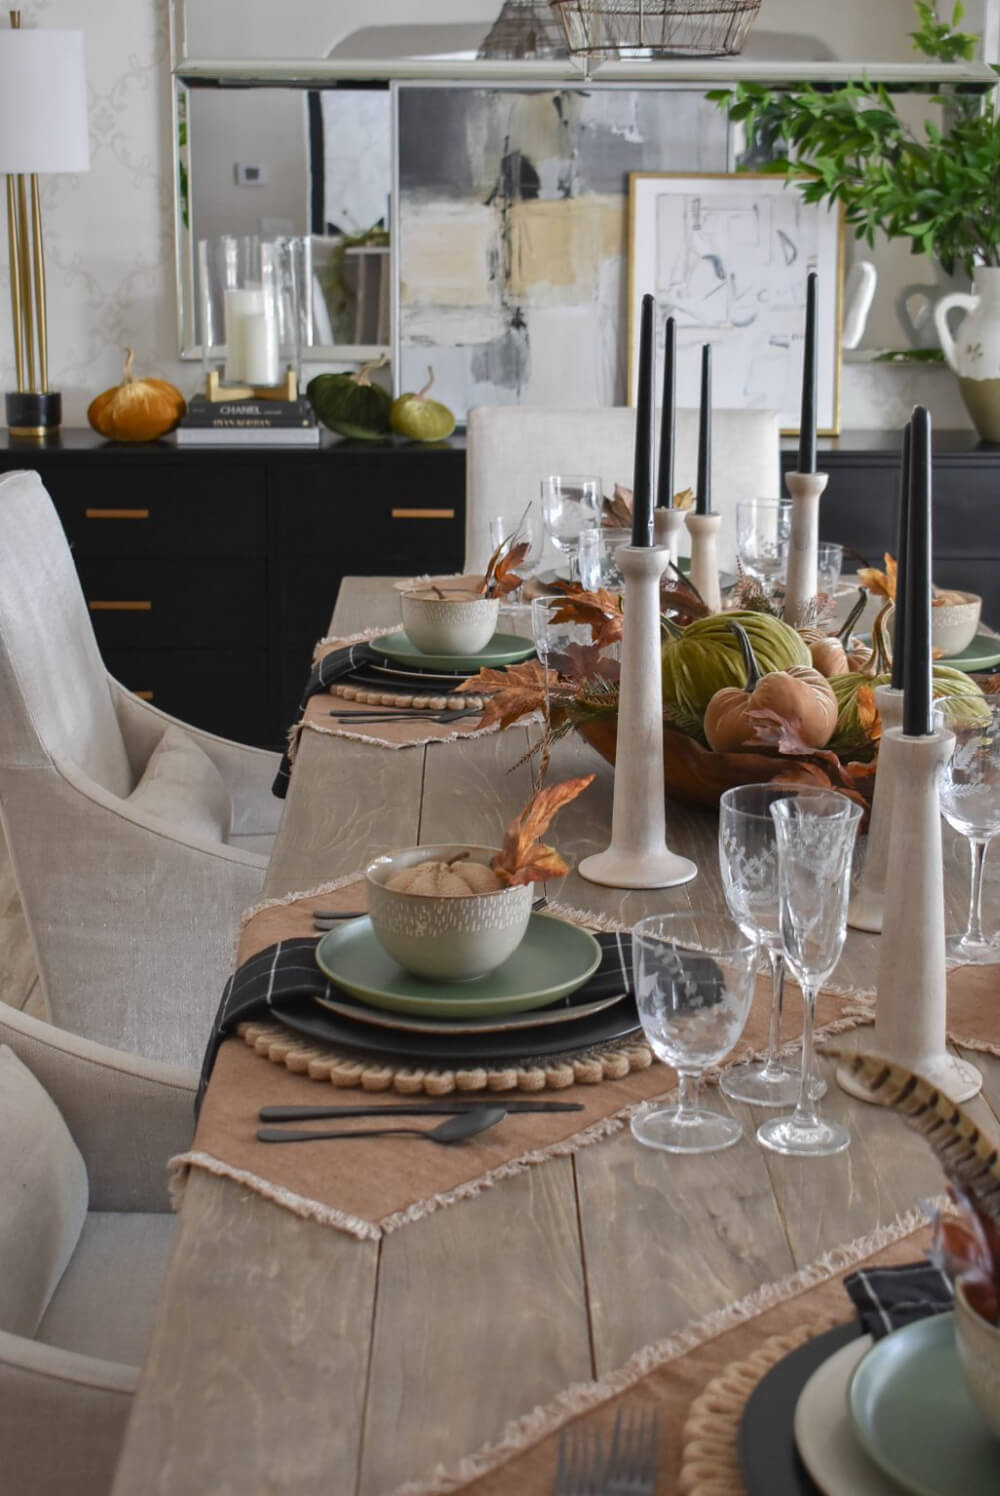 In The Love Of Home Files #4, a tablescape for the holiday with velvet pumpkins and upholstered chairs